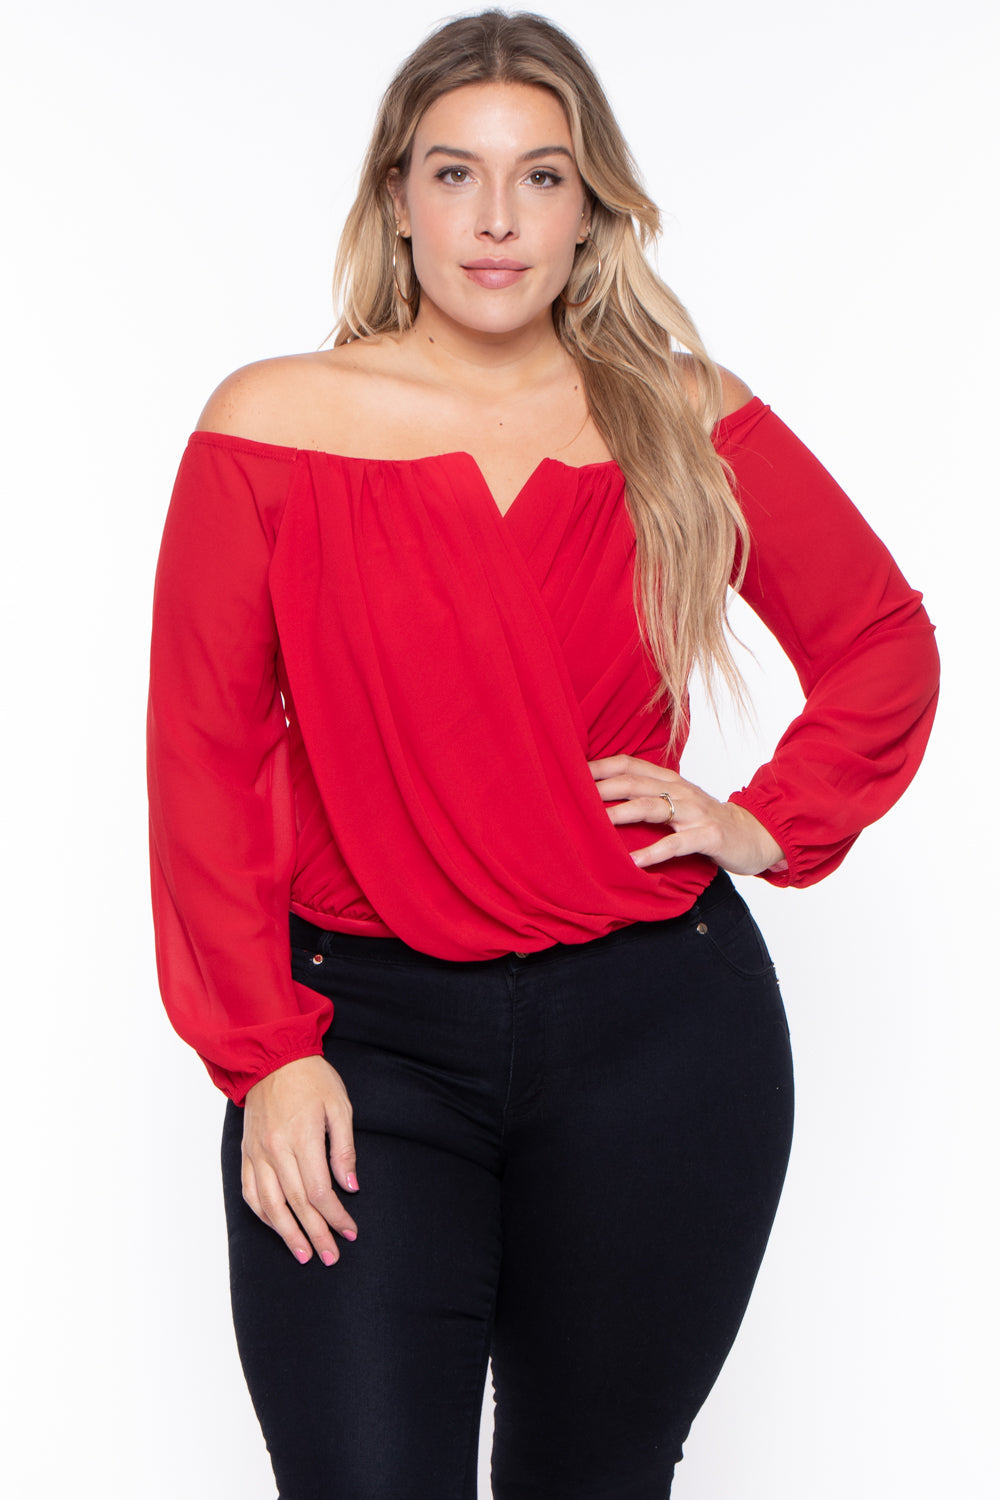 Bluebell Tops Plus Size Aryana Cross Over Top - Red